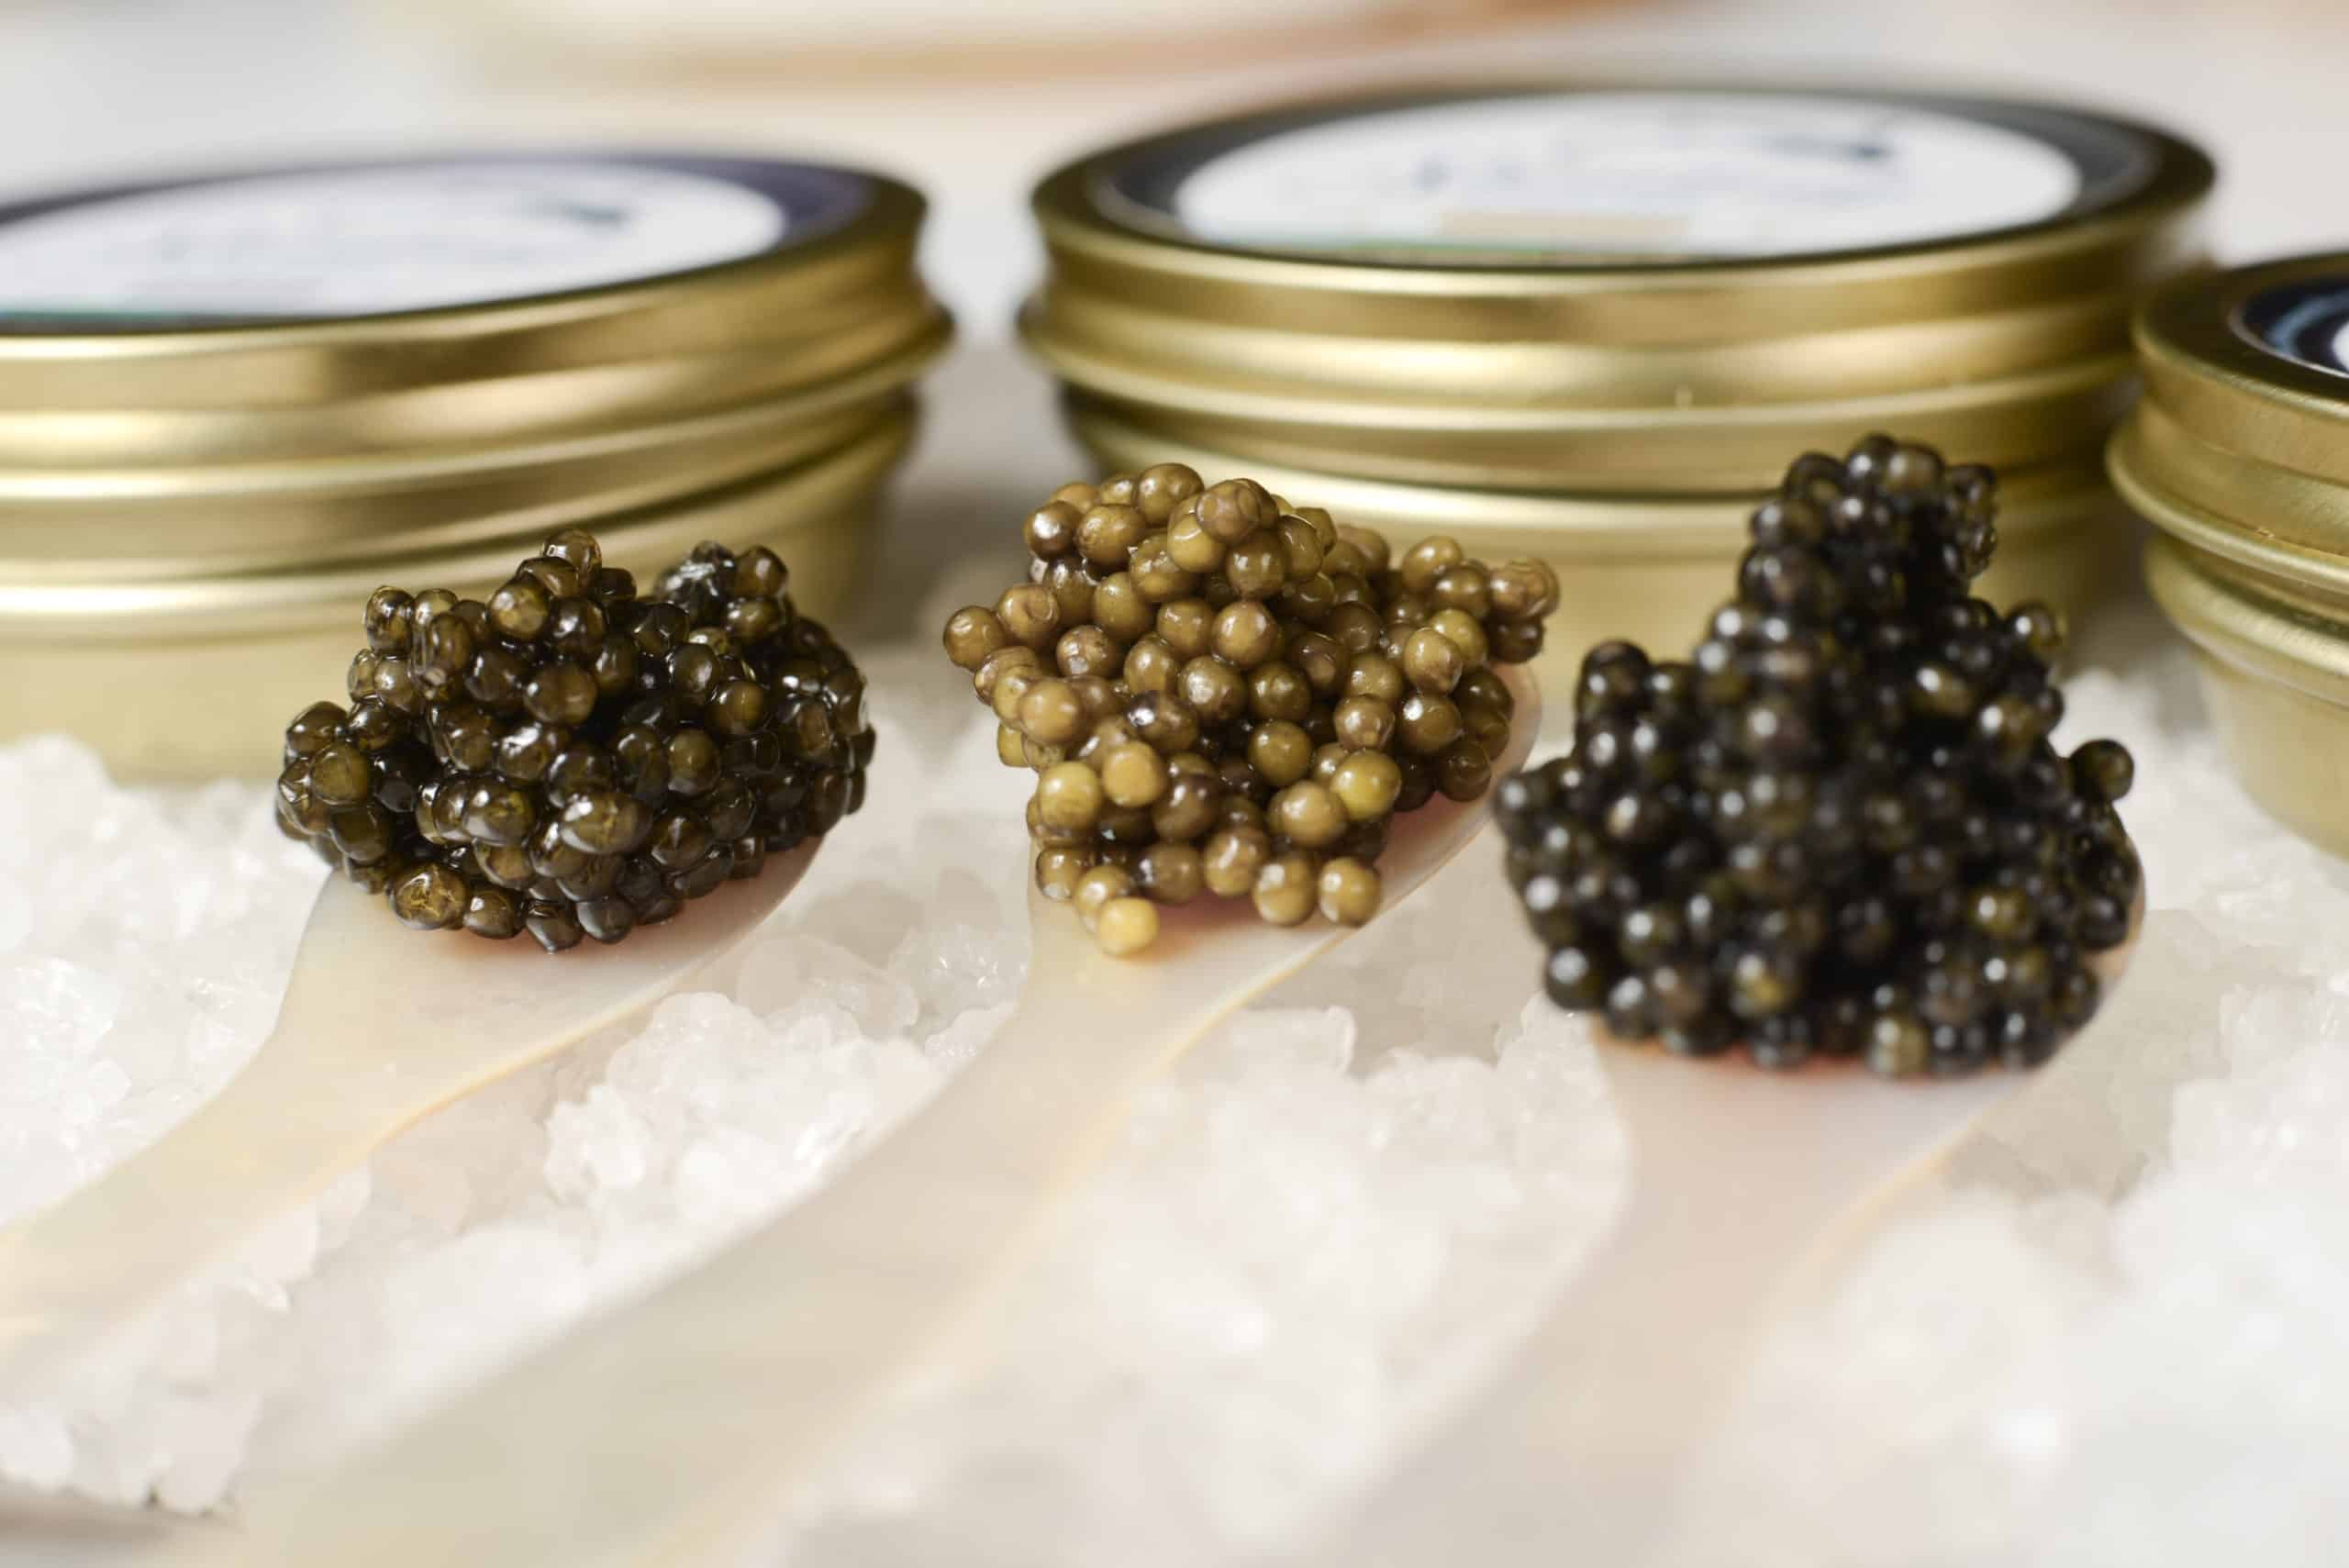 Three different caviar grades from Sterling Caviar served on mother of pearl spoons